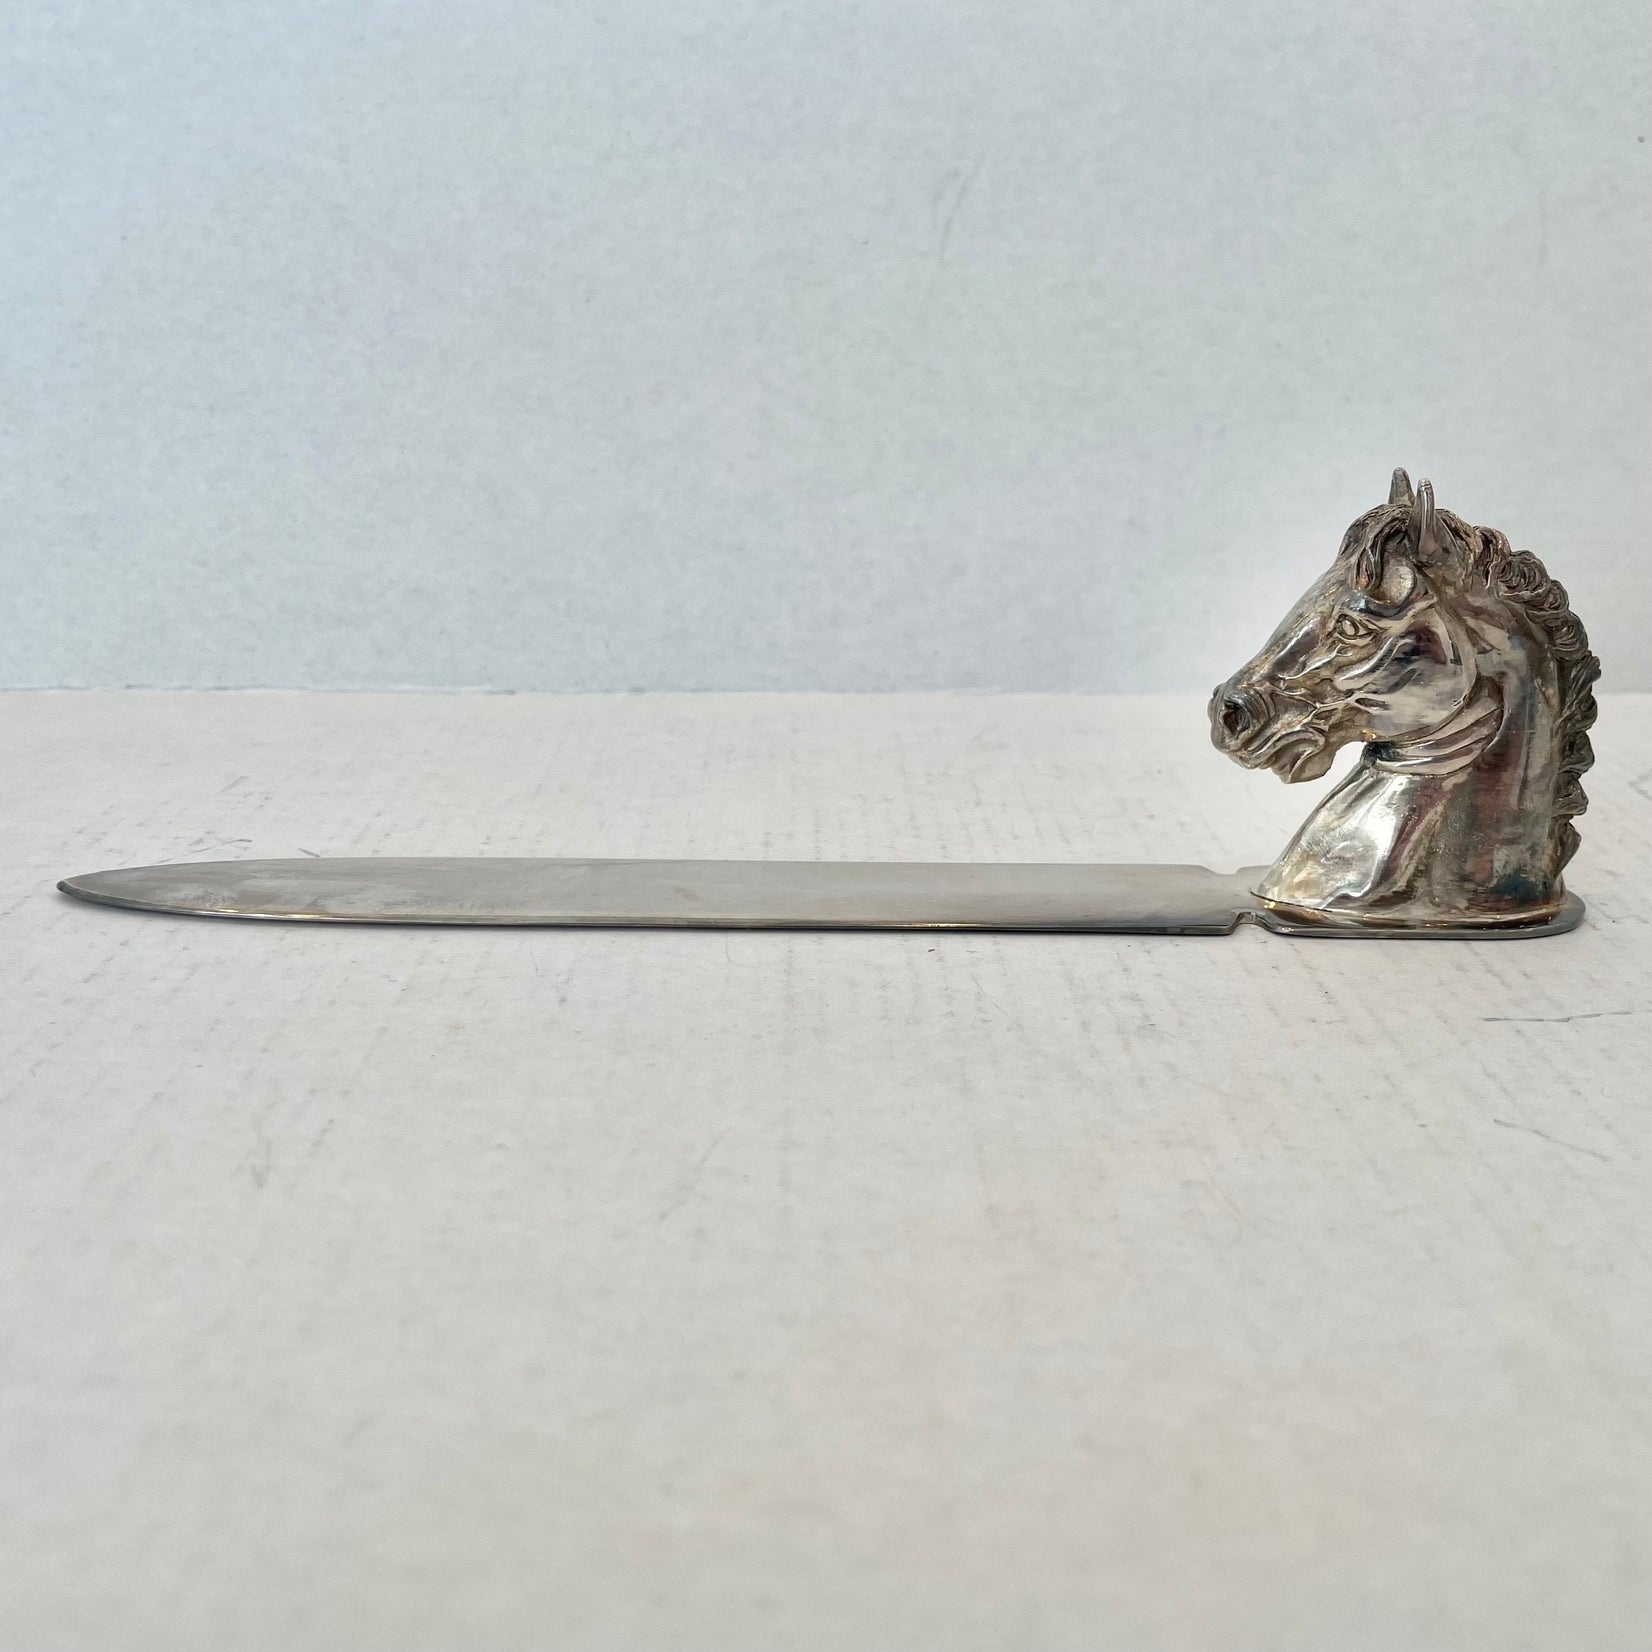 Reed & Barton Equestrian Letter Opener, 1940s USA